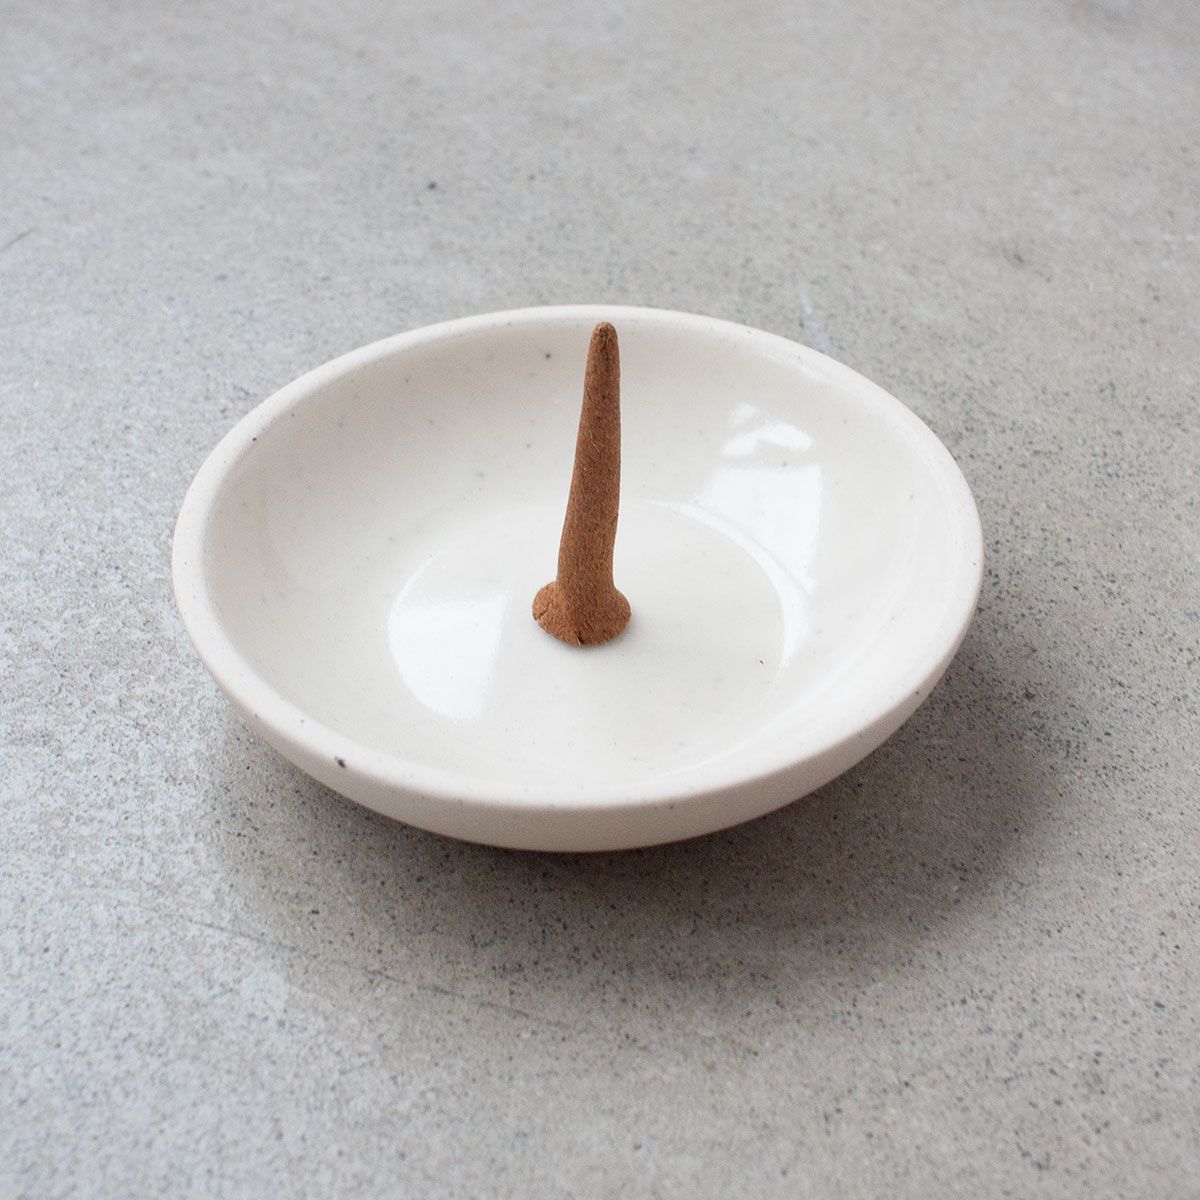 Single incense cone standing in a white dish on a concrete surface.